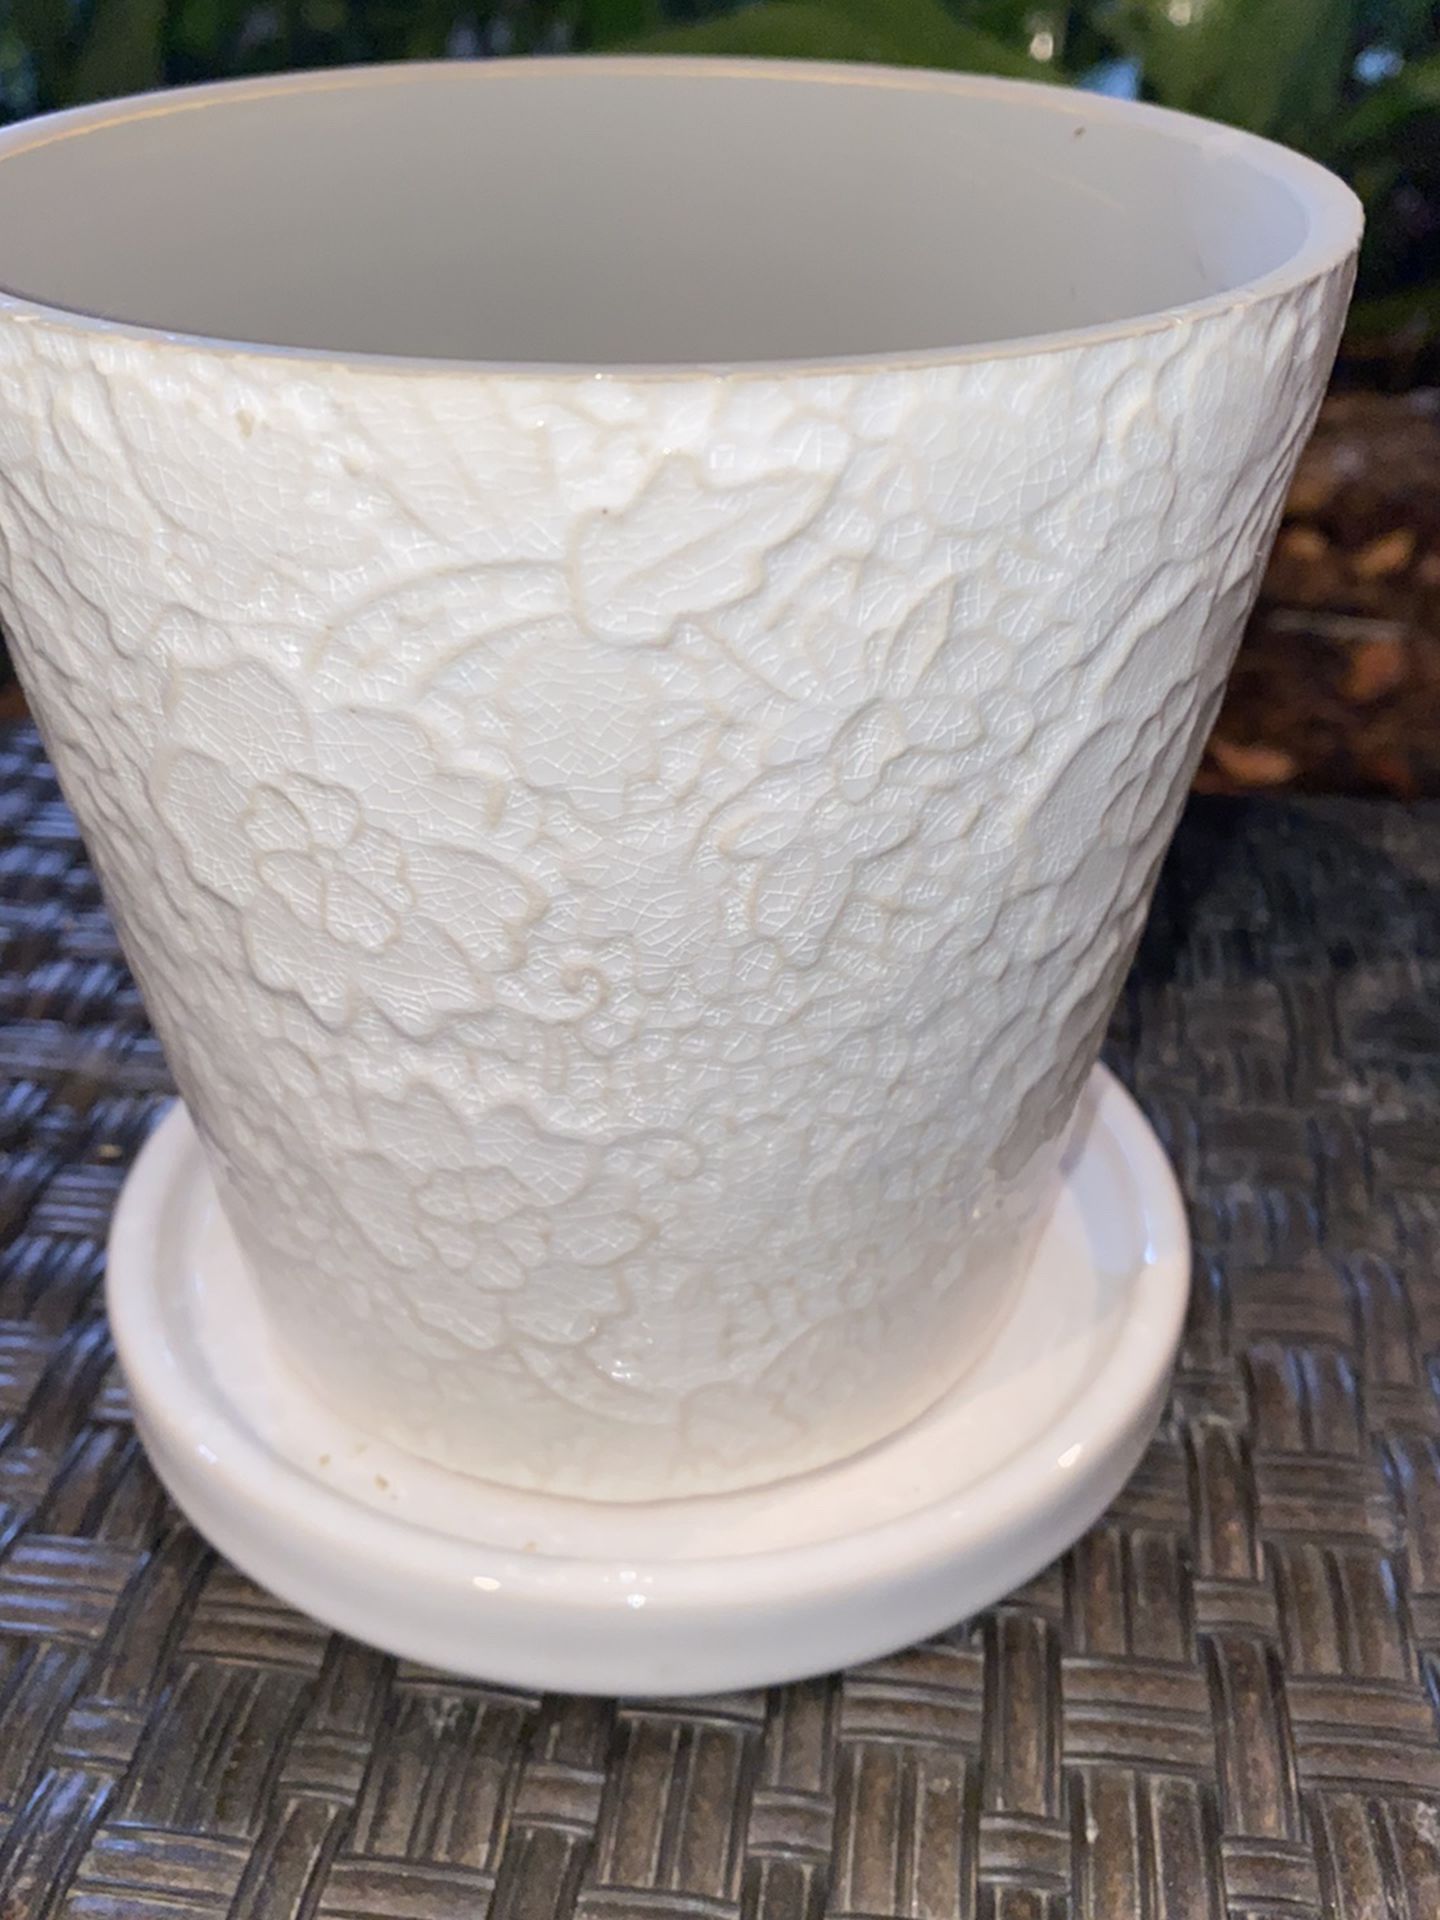 NEW Beautiful White Floral Planter Pot With Drainage Hole & White Saucer